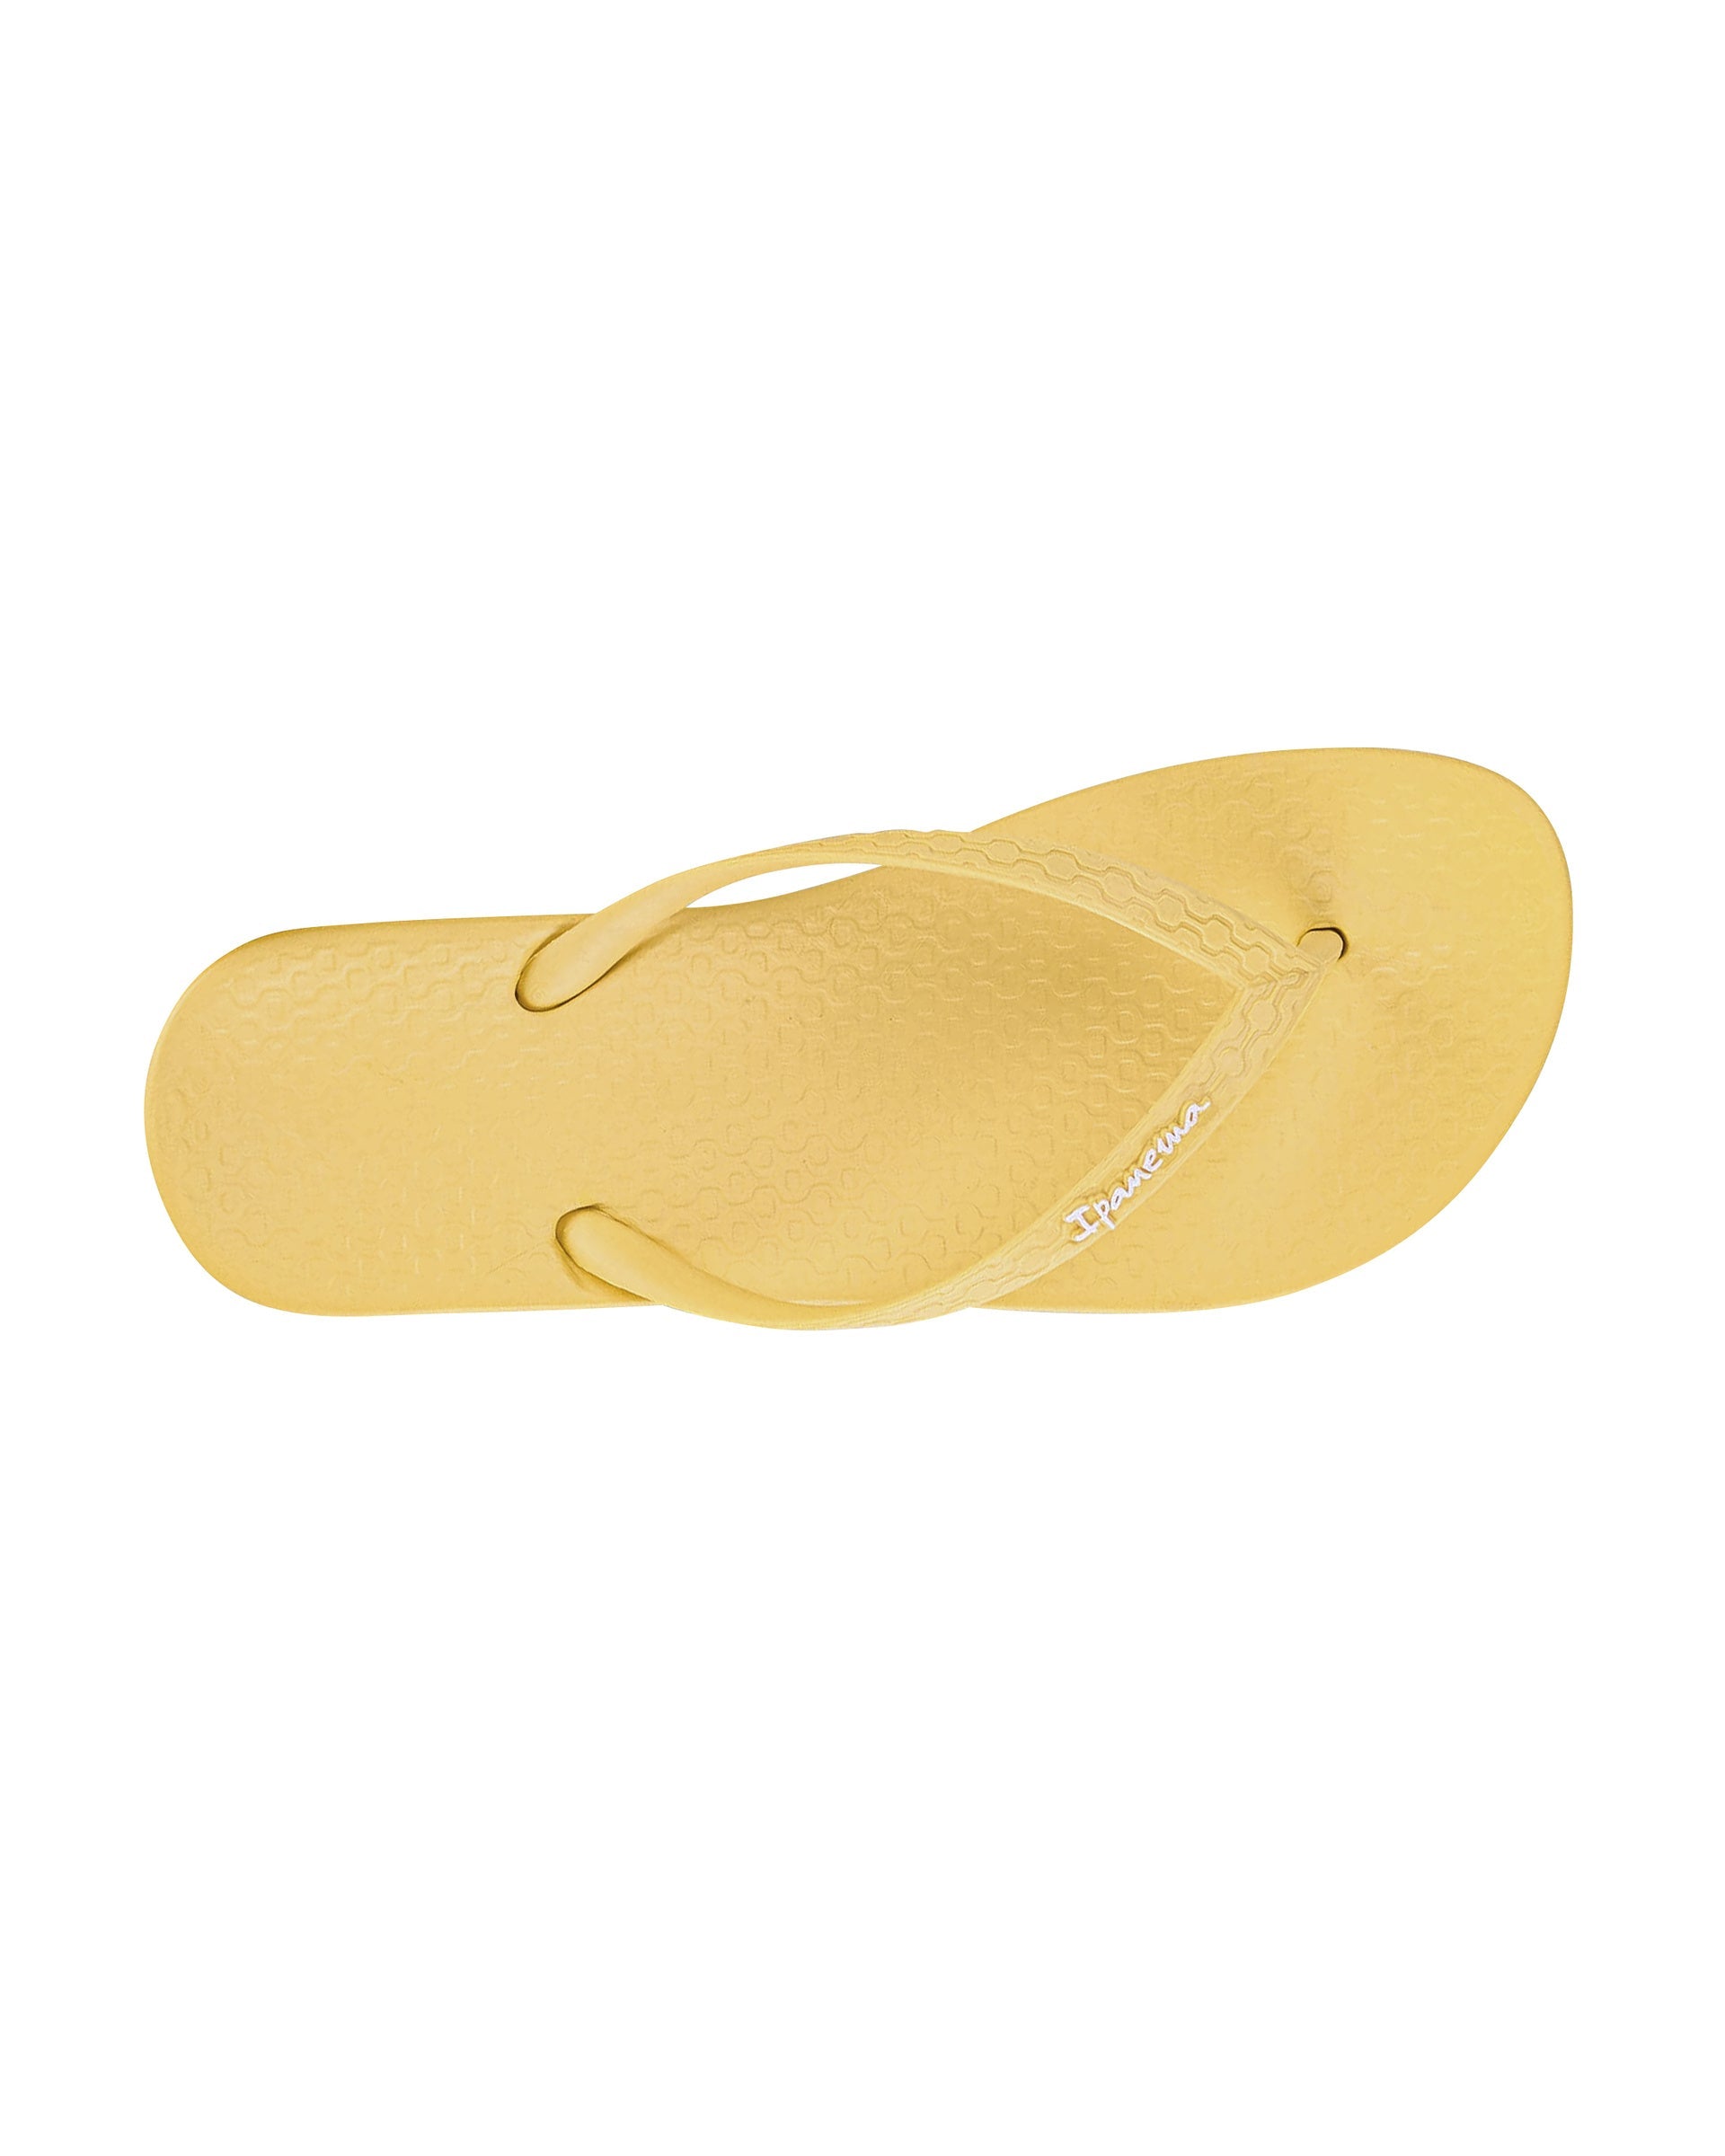 Top side view of a yellow Ipanema Ana Colors women's flip flop.